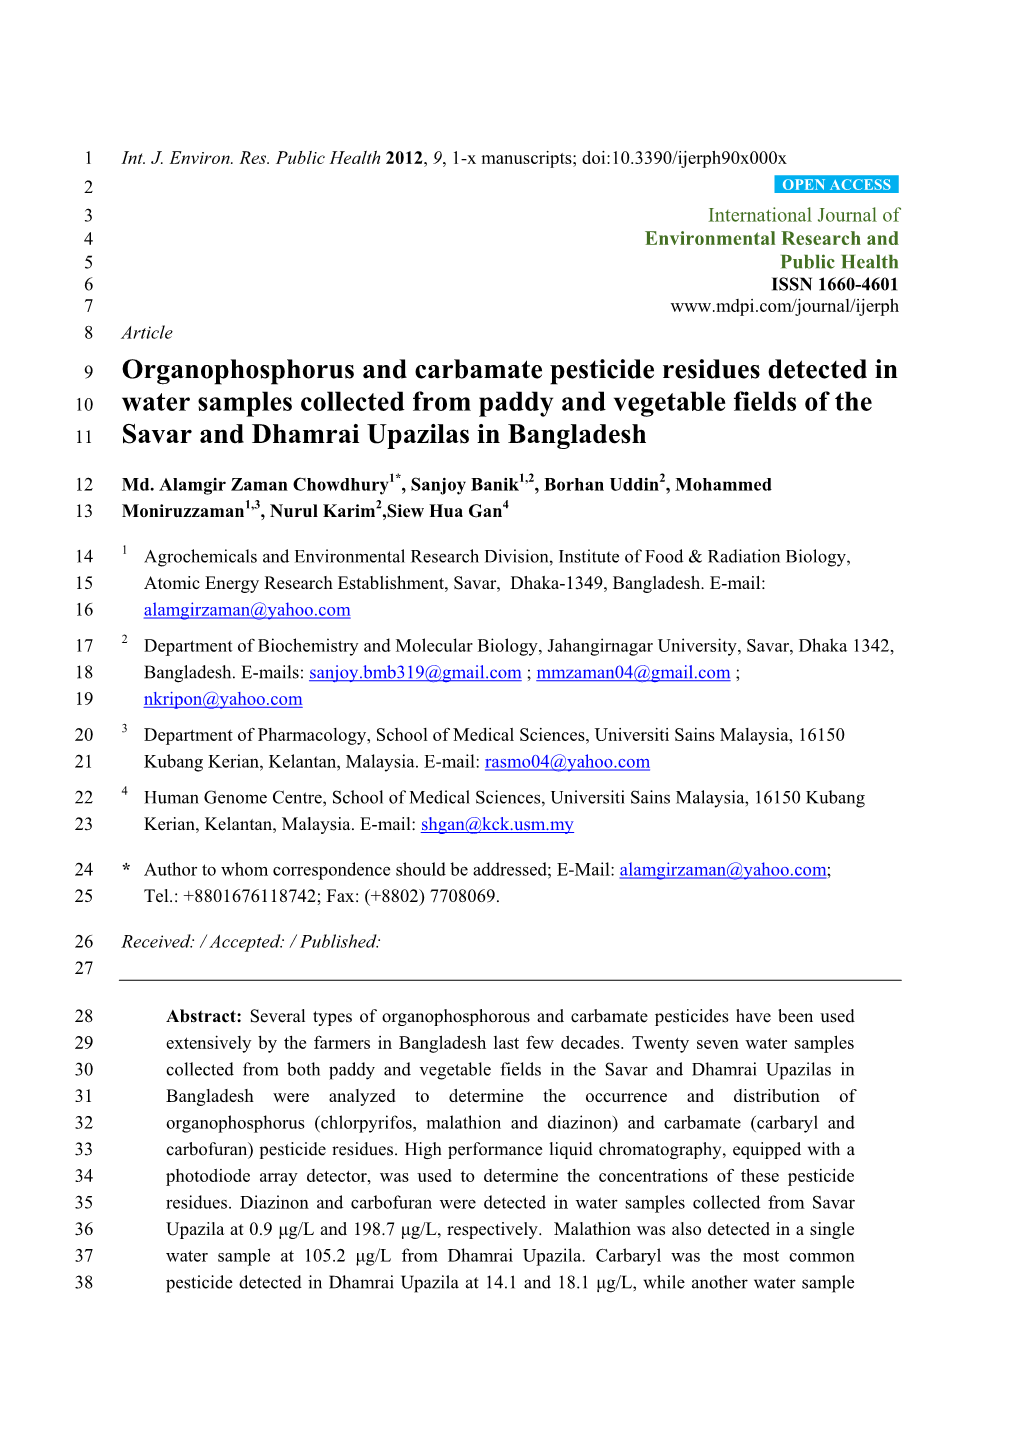 Organophosphorus and Carbamate Pesticide Residues Detected in Water